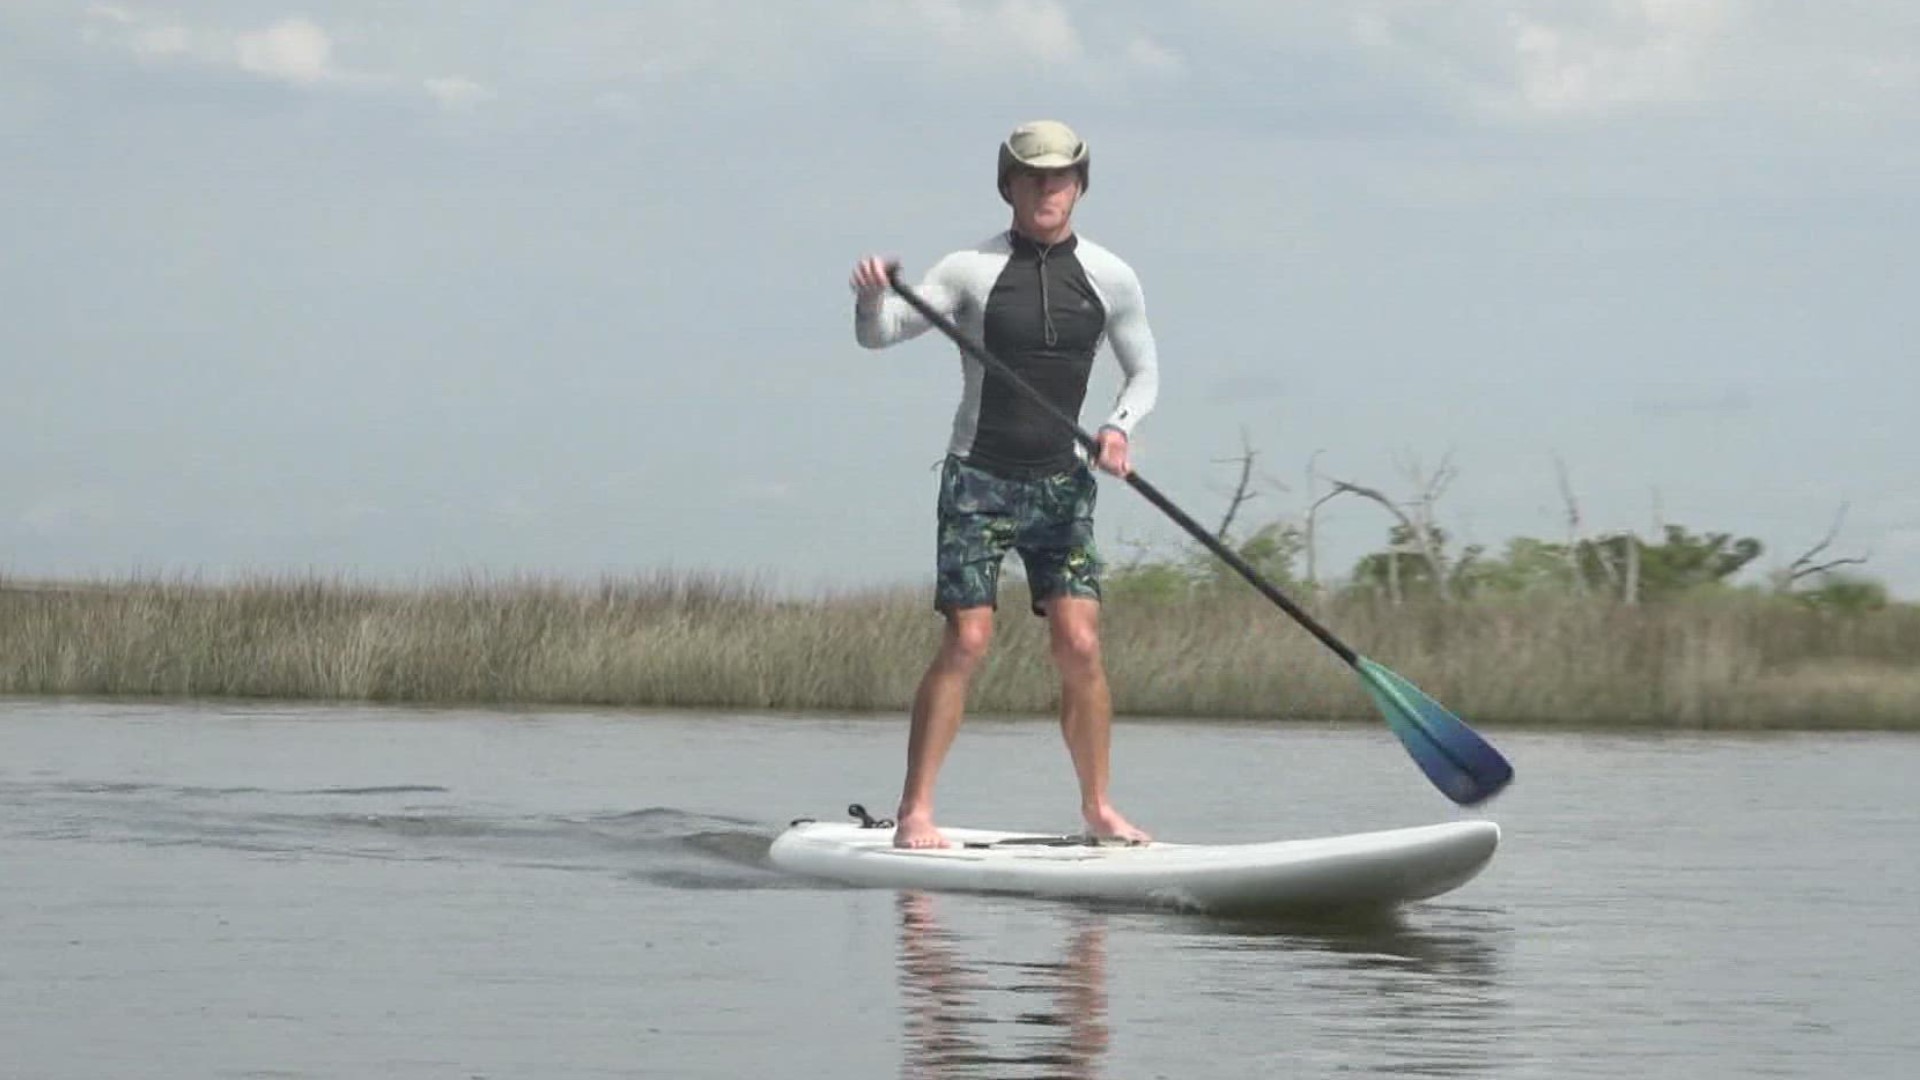 World record holder and Mayport resident Kurtis Loftus hopes to complete a 76 mile journey on his stand up paddle board in less than 24 hours